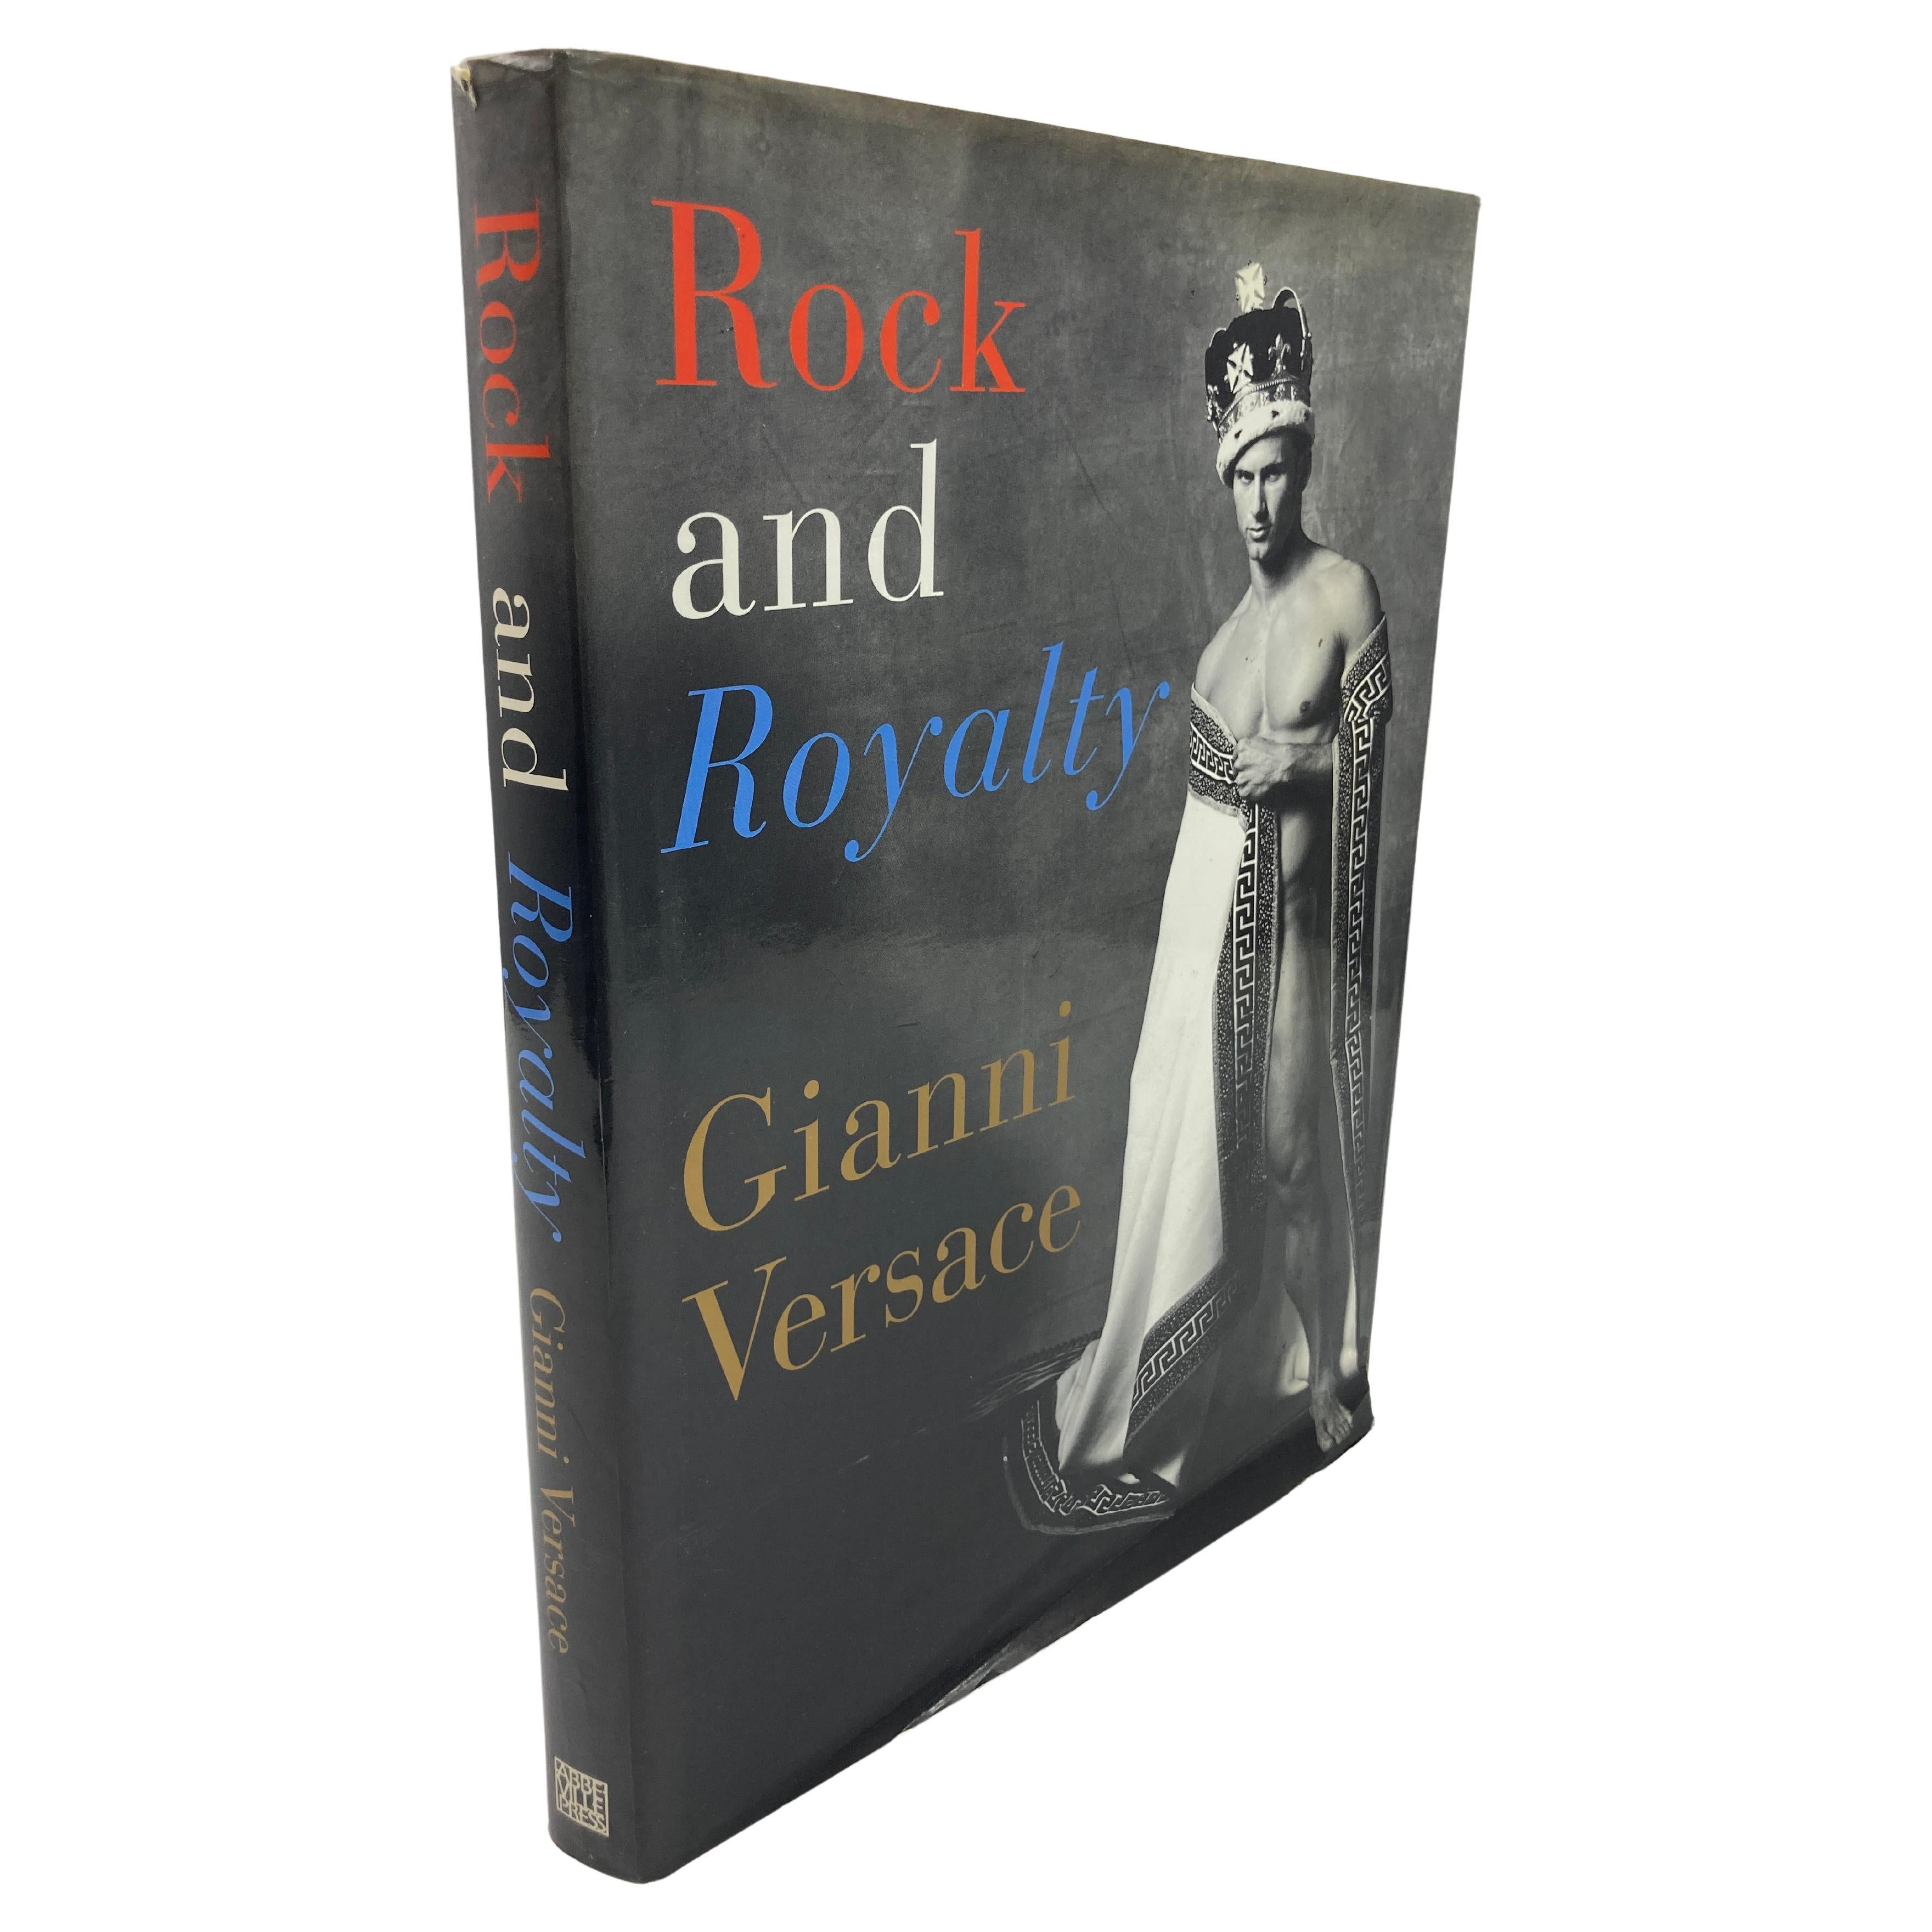 Rock and Royalty Gianni Versace Hardcover Table Book 1st Ed. Large Format For Sale